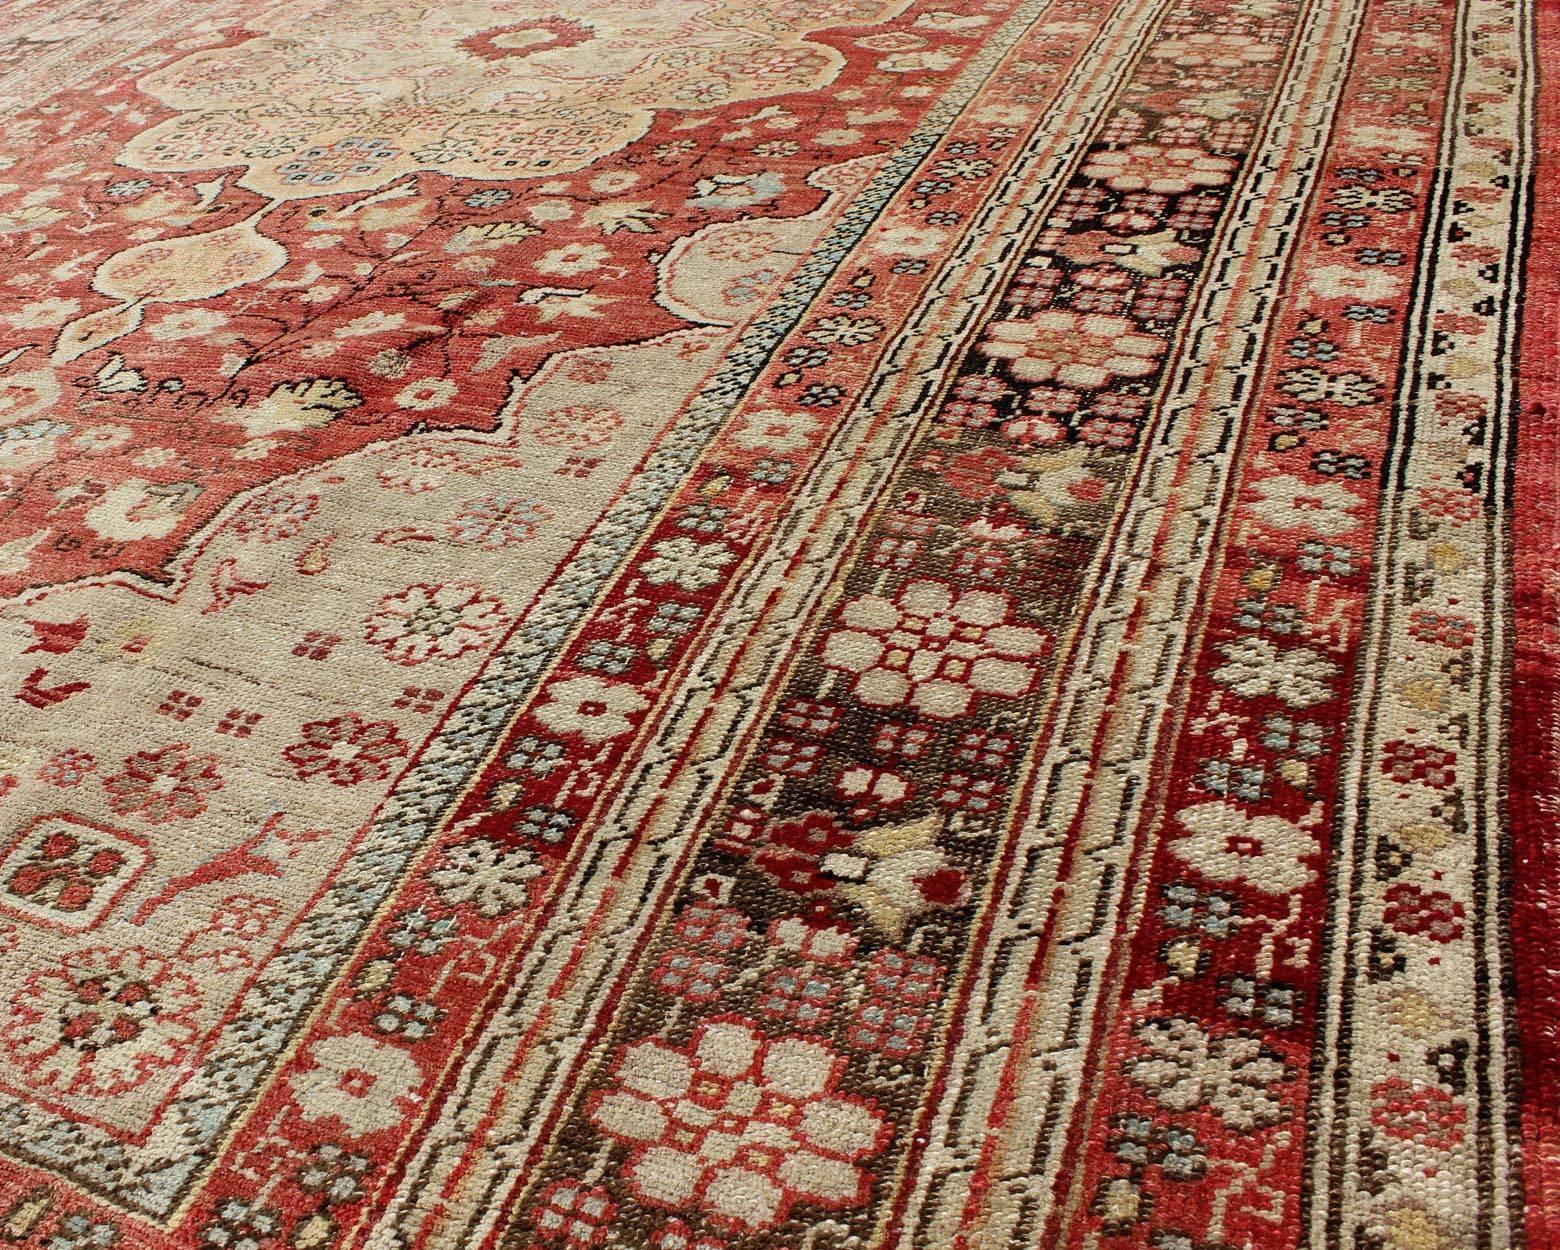 Antique Oushak Rug in Soft Red, Brown and Tan In Excellent Condition For Sale In Atlanta, GA